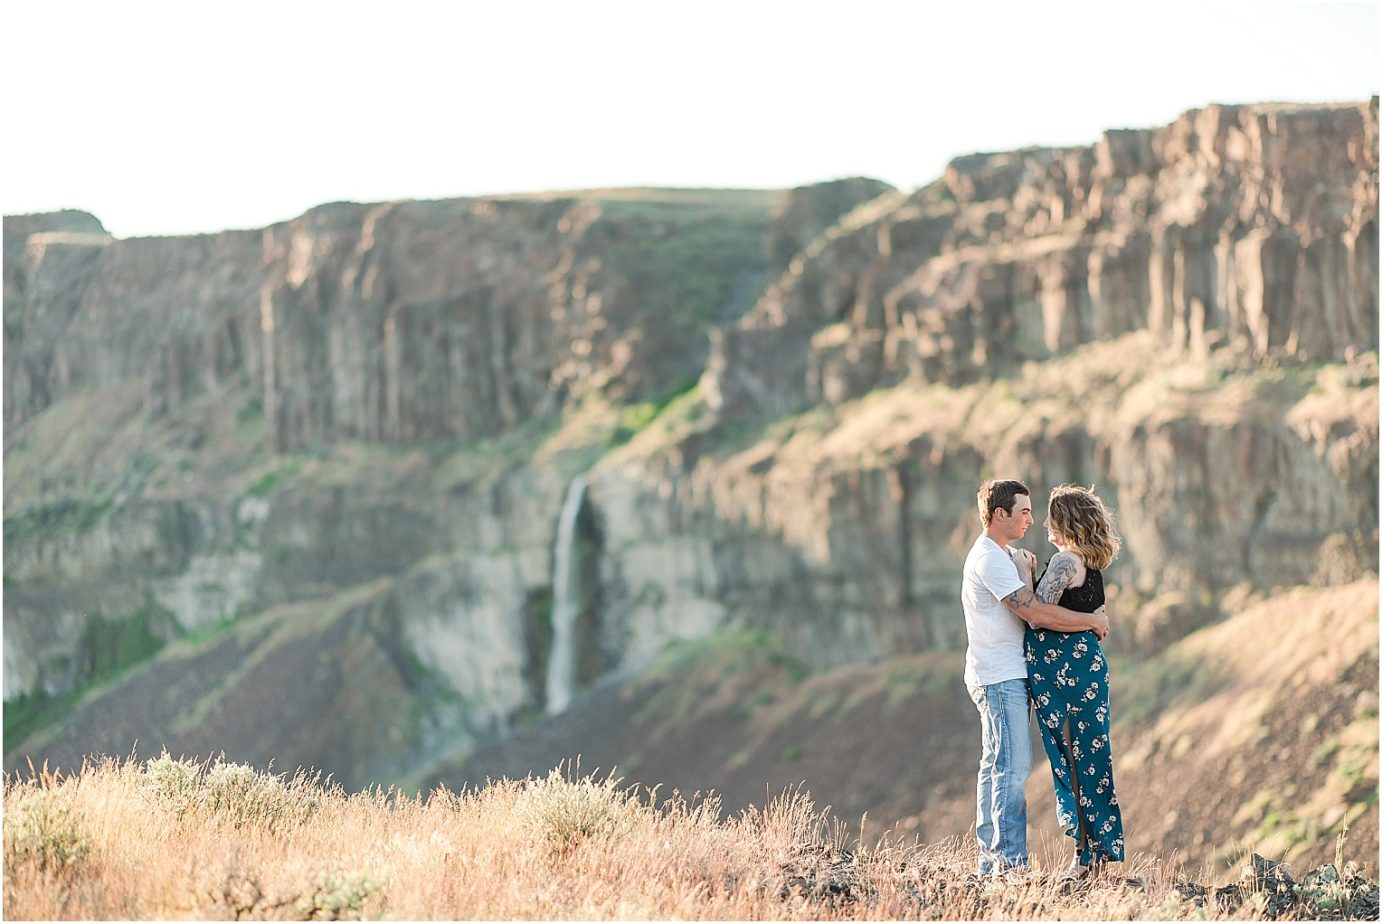 Vantage Crags Maternity Session unposed in the desert